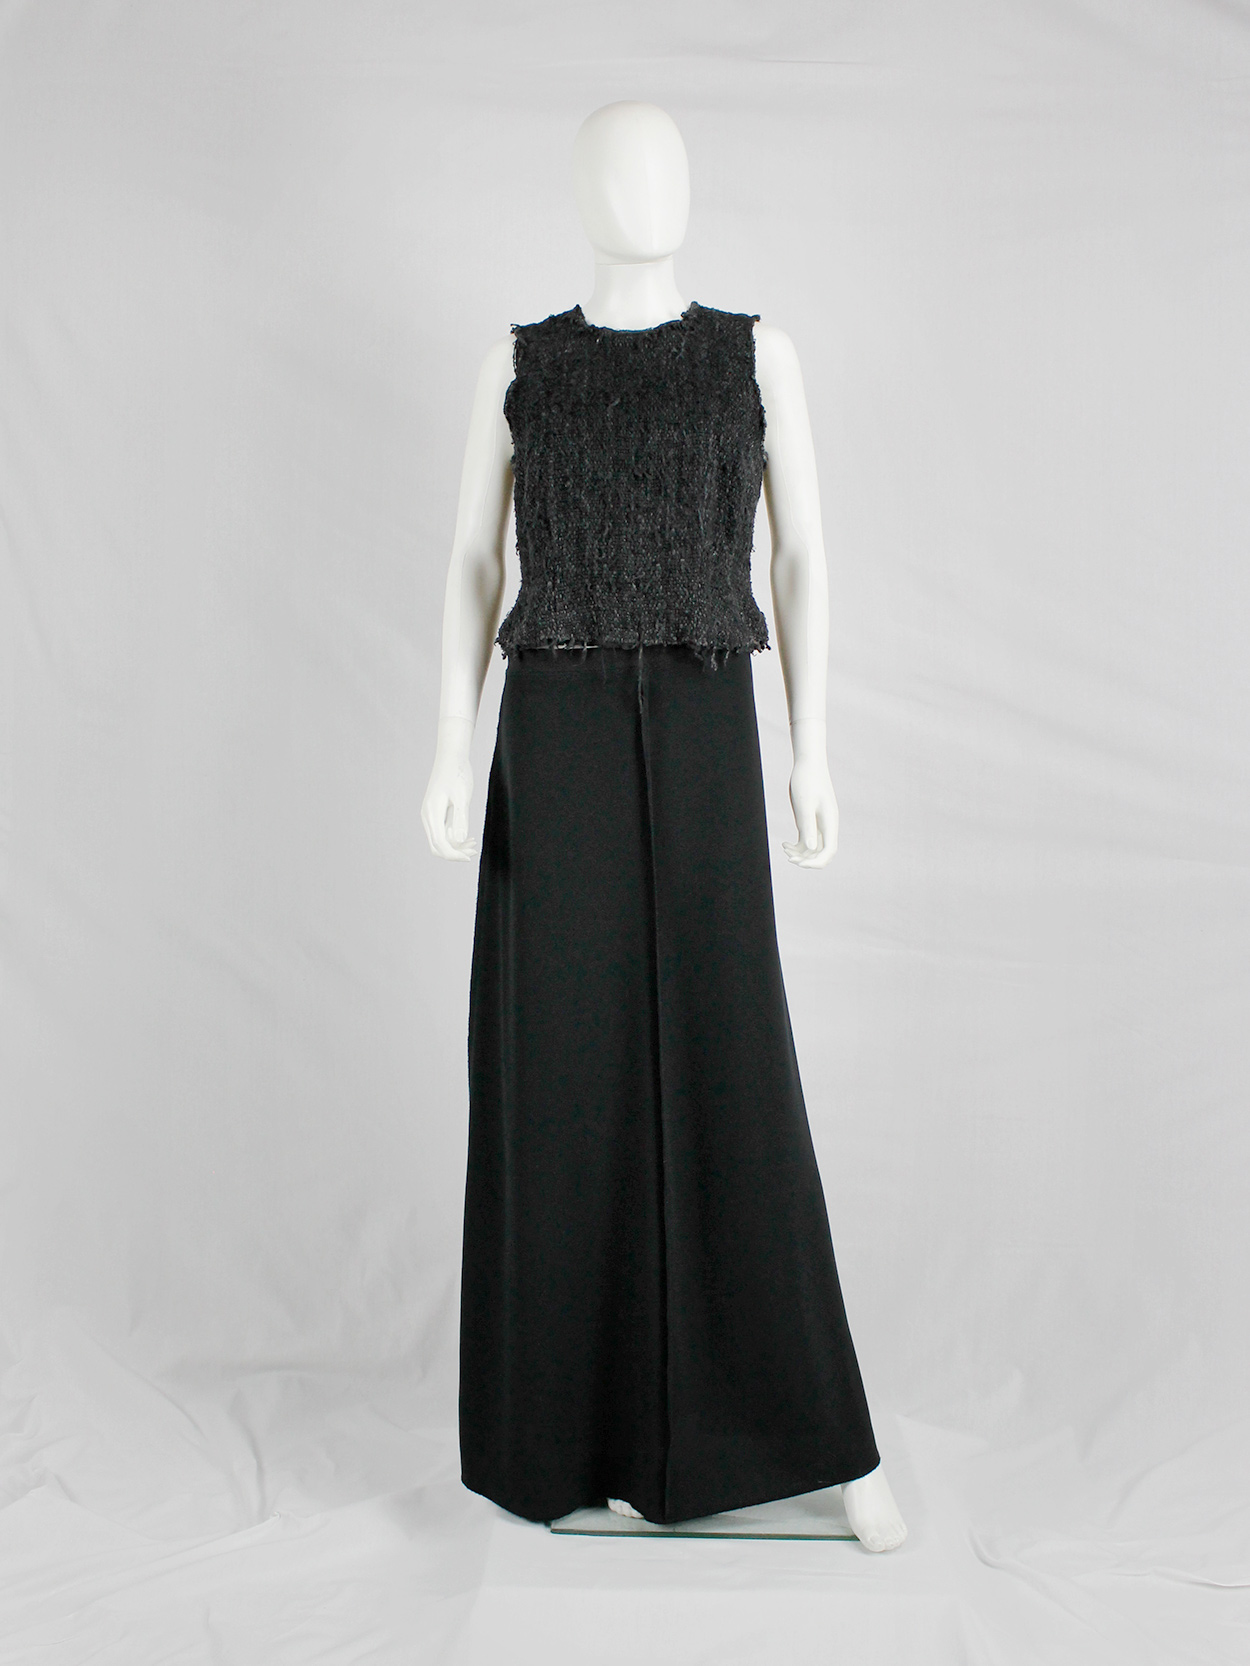 Maison Martin Margiela reproduction of a black spring 1991 inside out ...